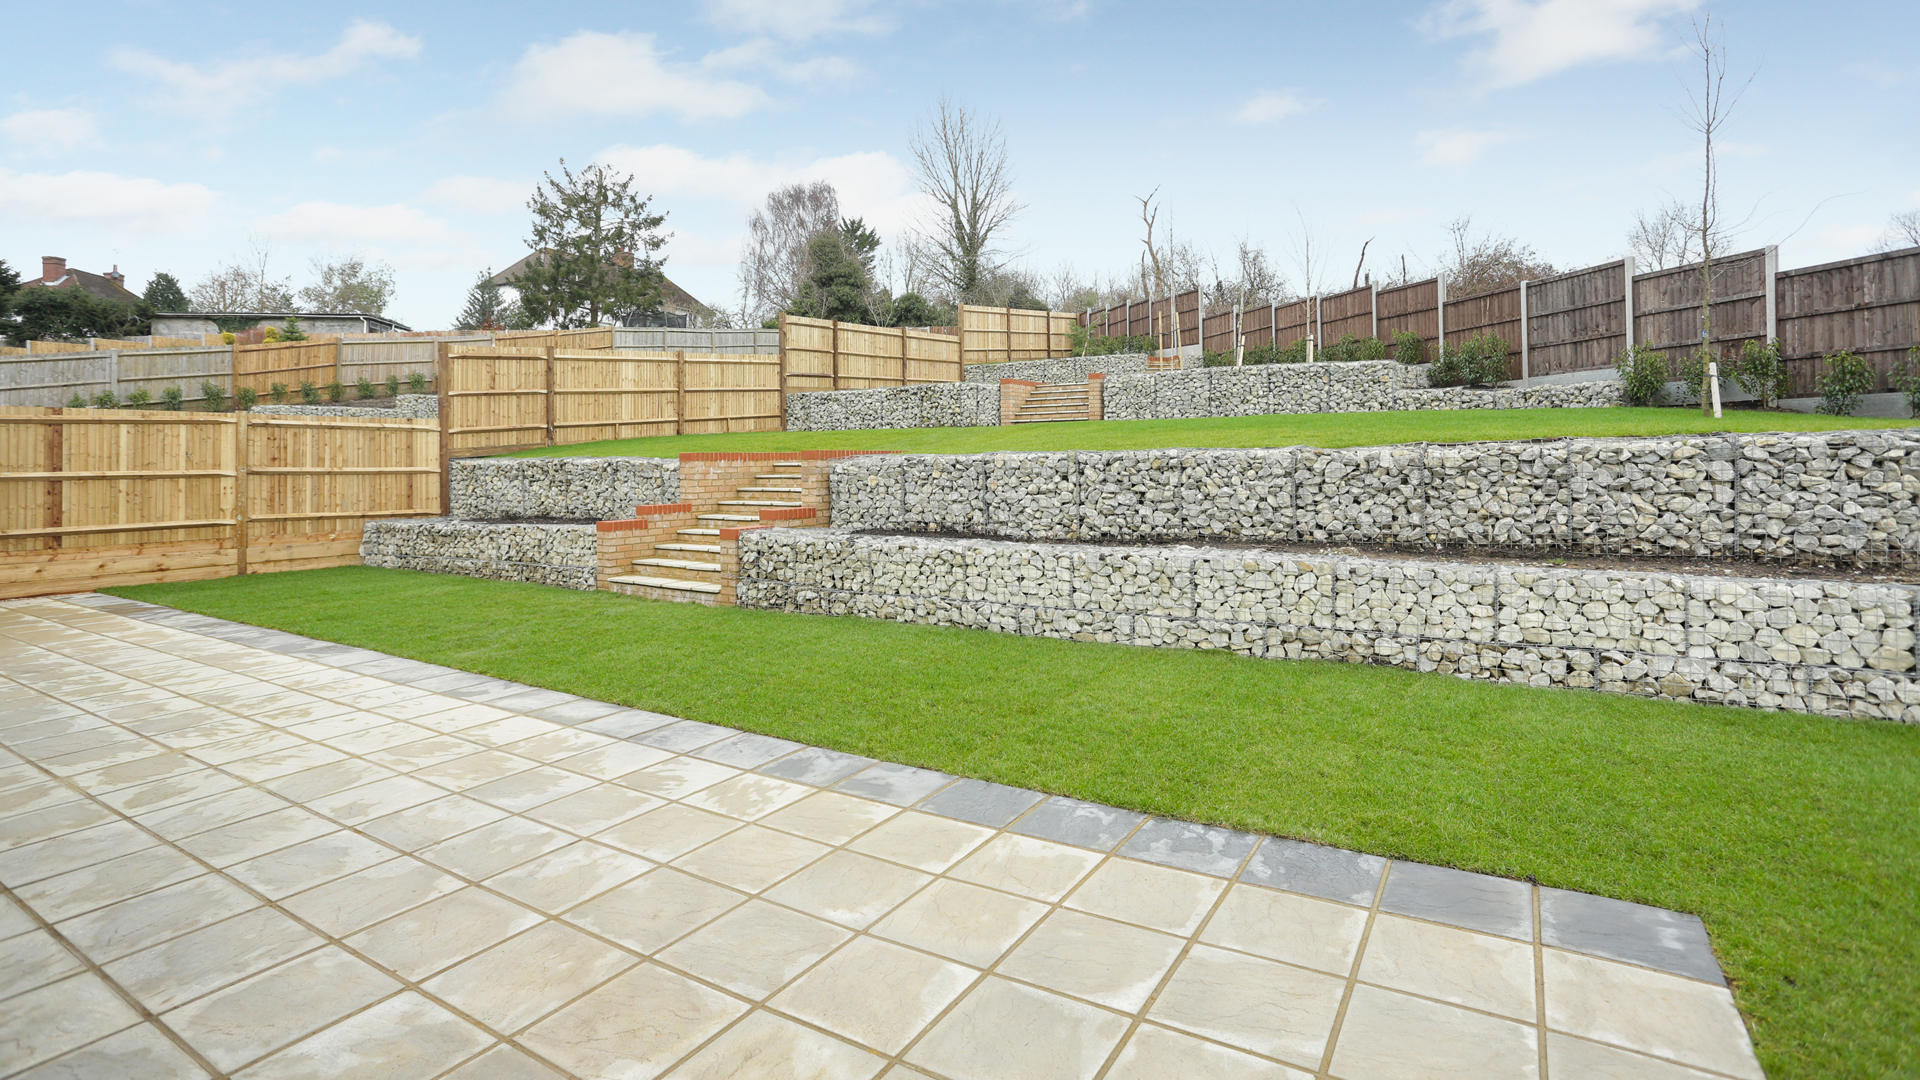 Landscaped Garden at Woodside Court with tiling and grass